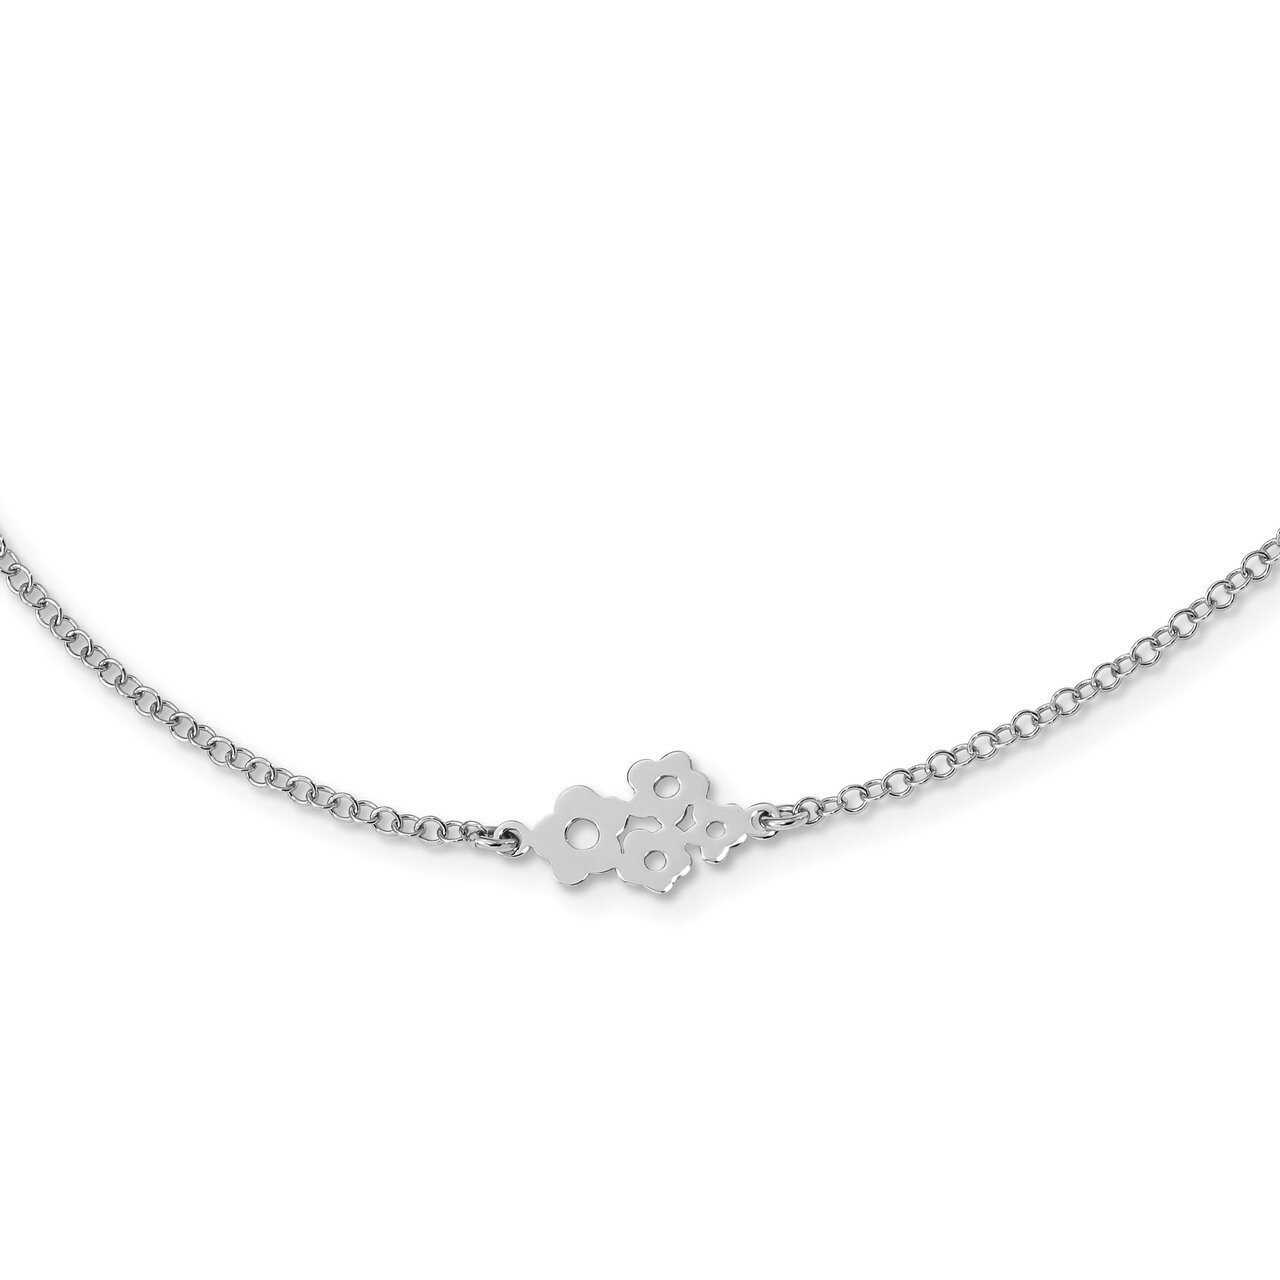 6 Station Flower Necklace 36 Inch Sterling Silver Rhodium-plated QG4567-36